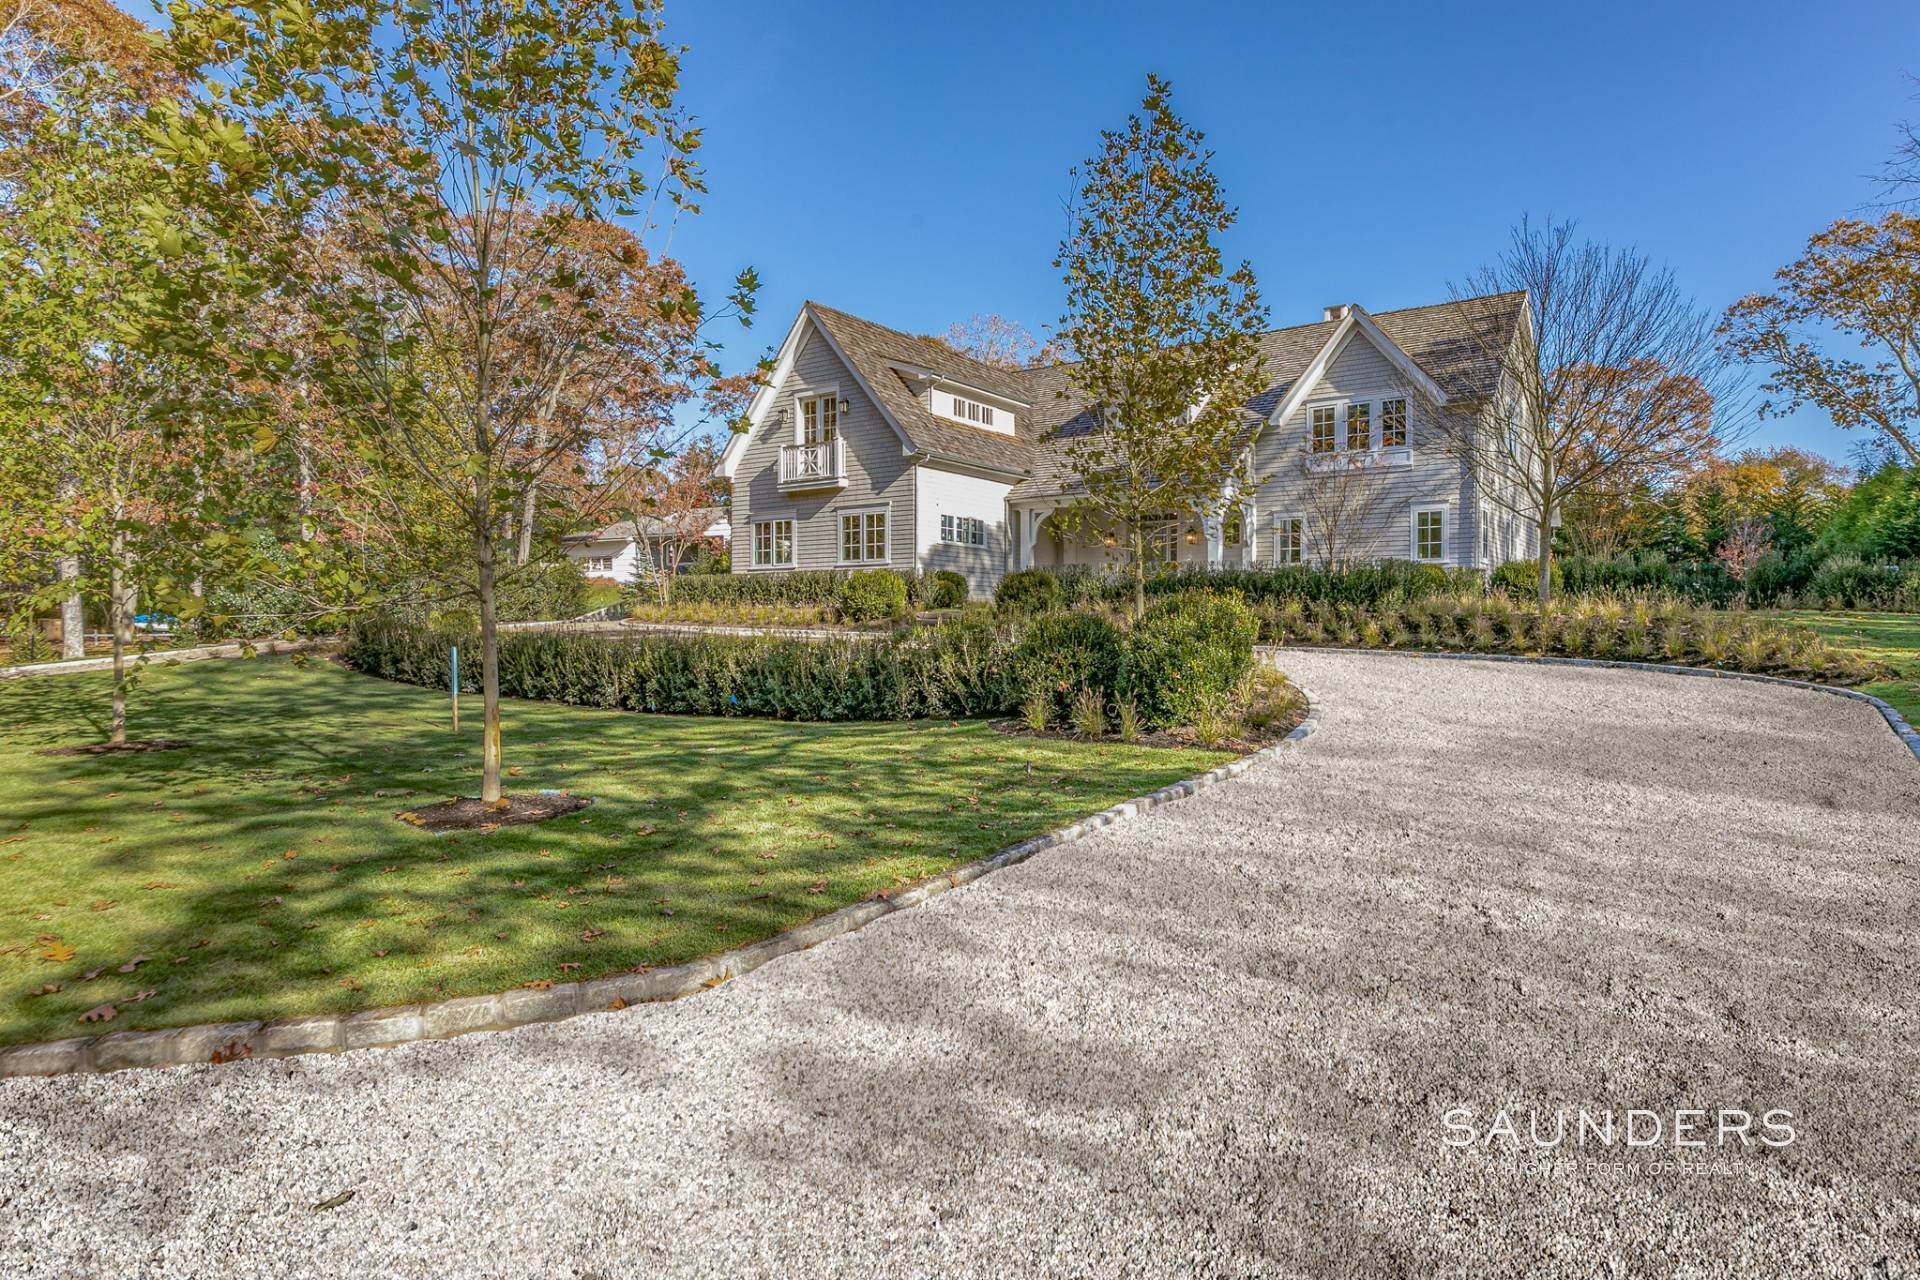 2. Single Family Homes for Sale at Finished And Fabulous New Construction On Cove Hollow 58 Cove Hollow Road, East Hampton, NY 11937